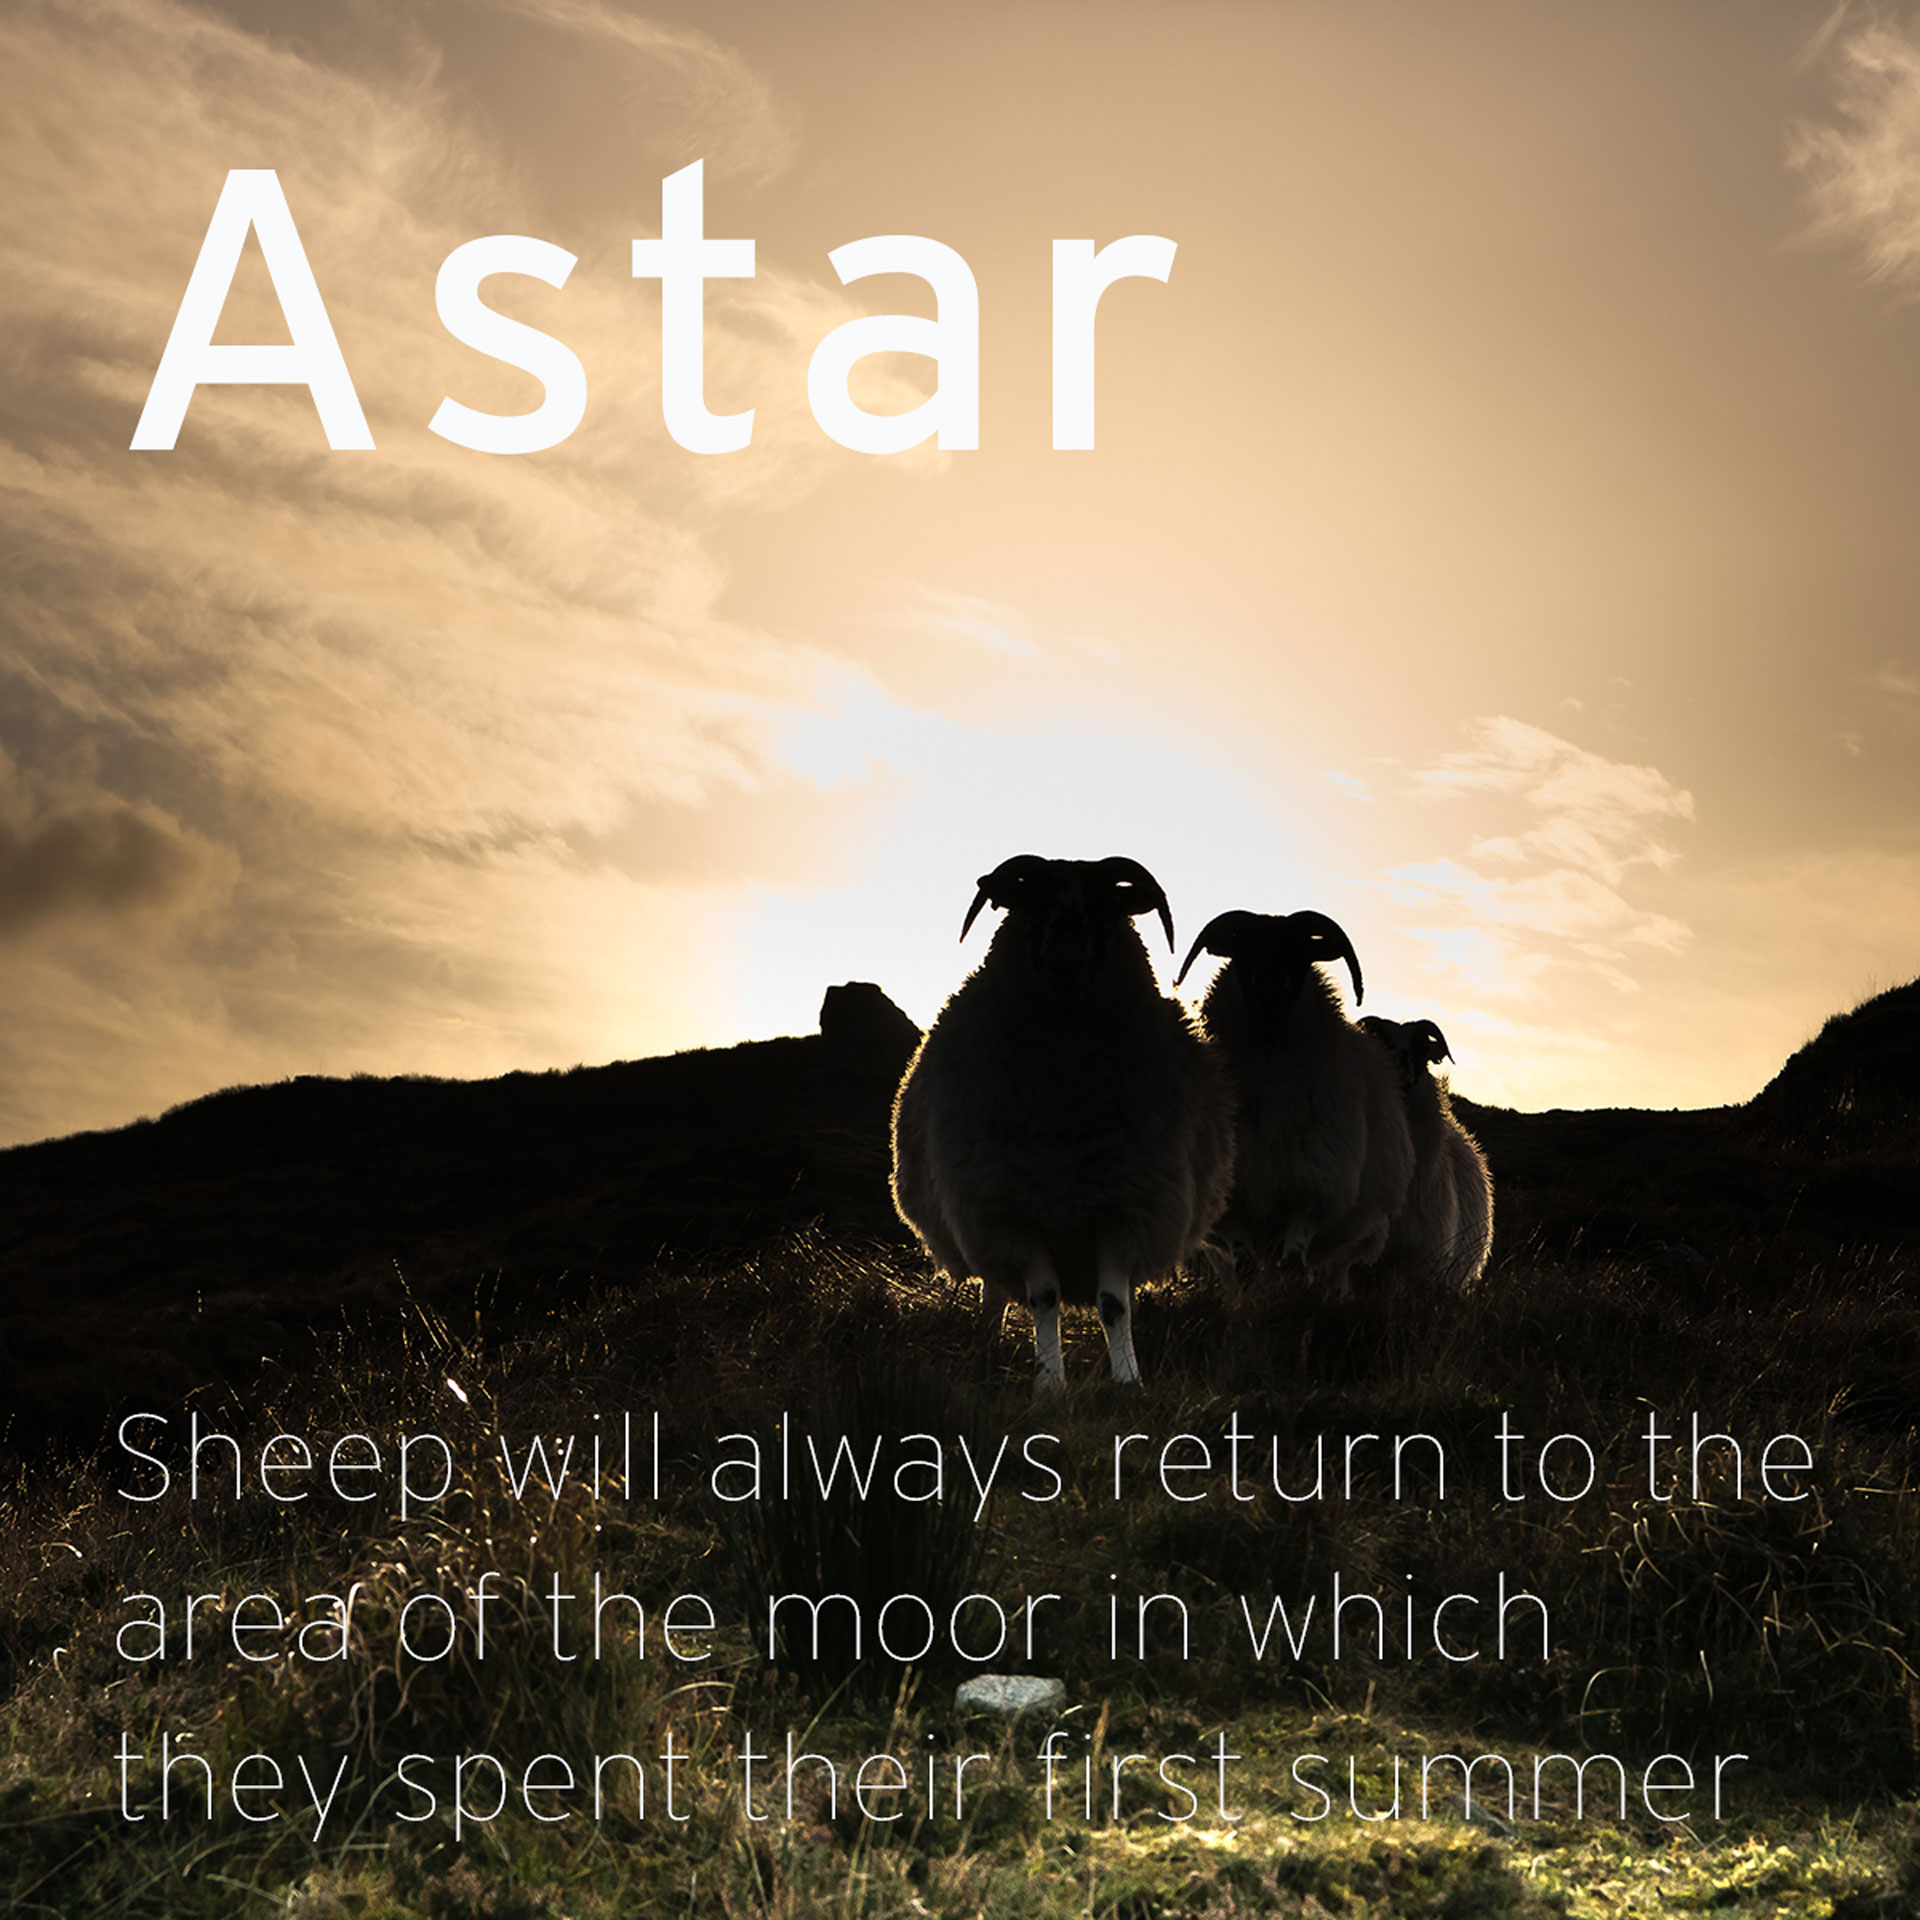 silhouette of sheep with description